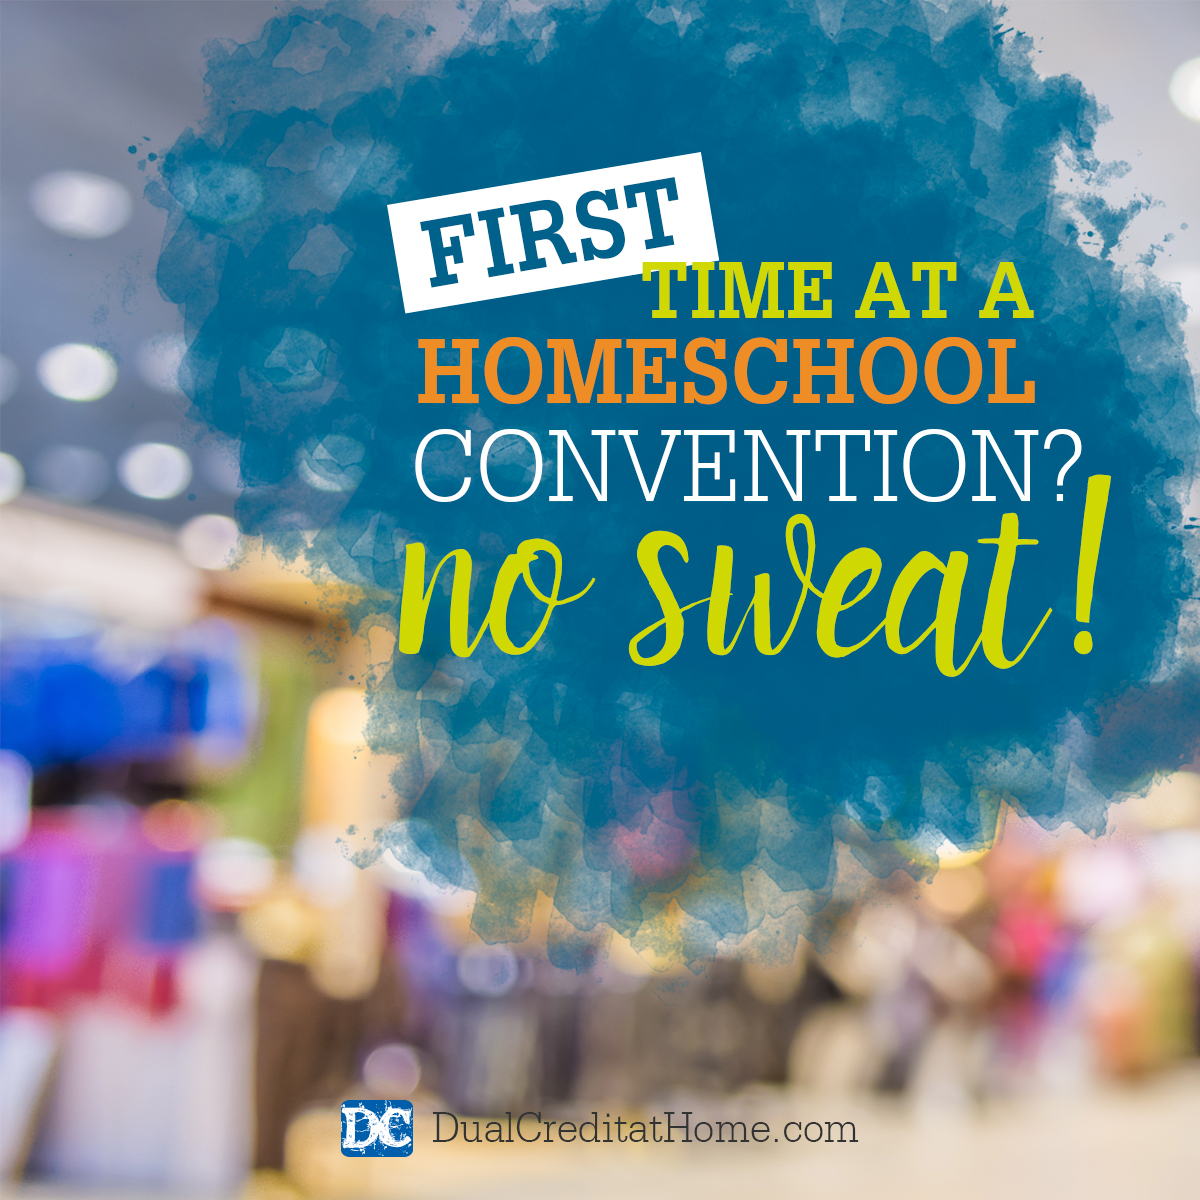 First Time at a Homeschool Convention? No Sweat!